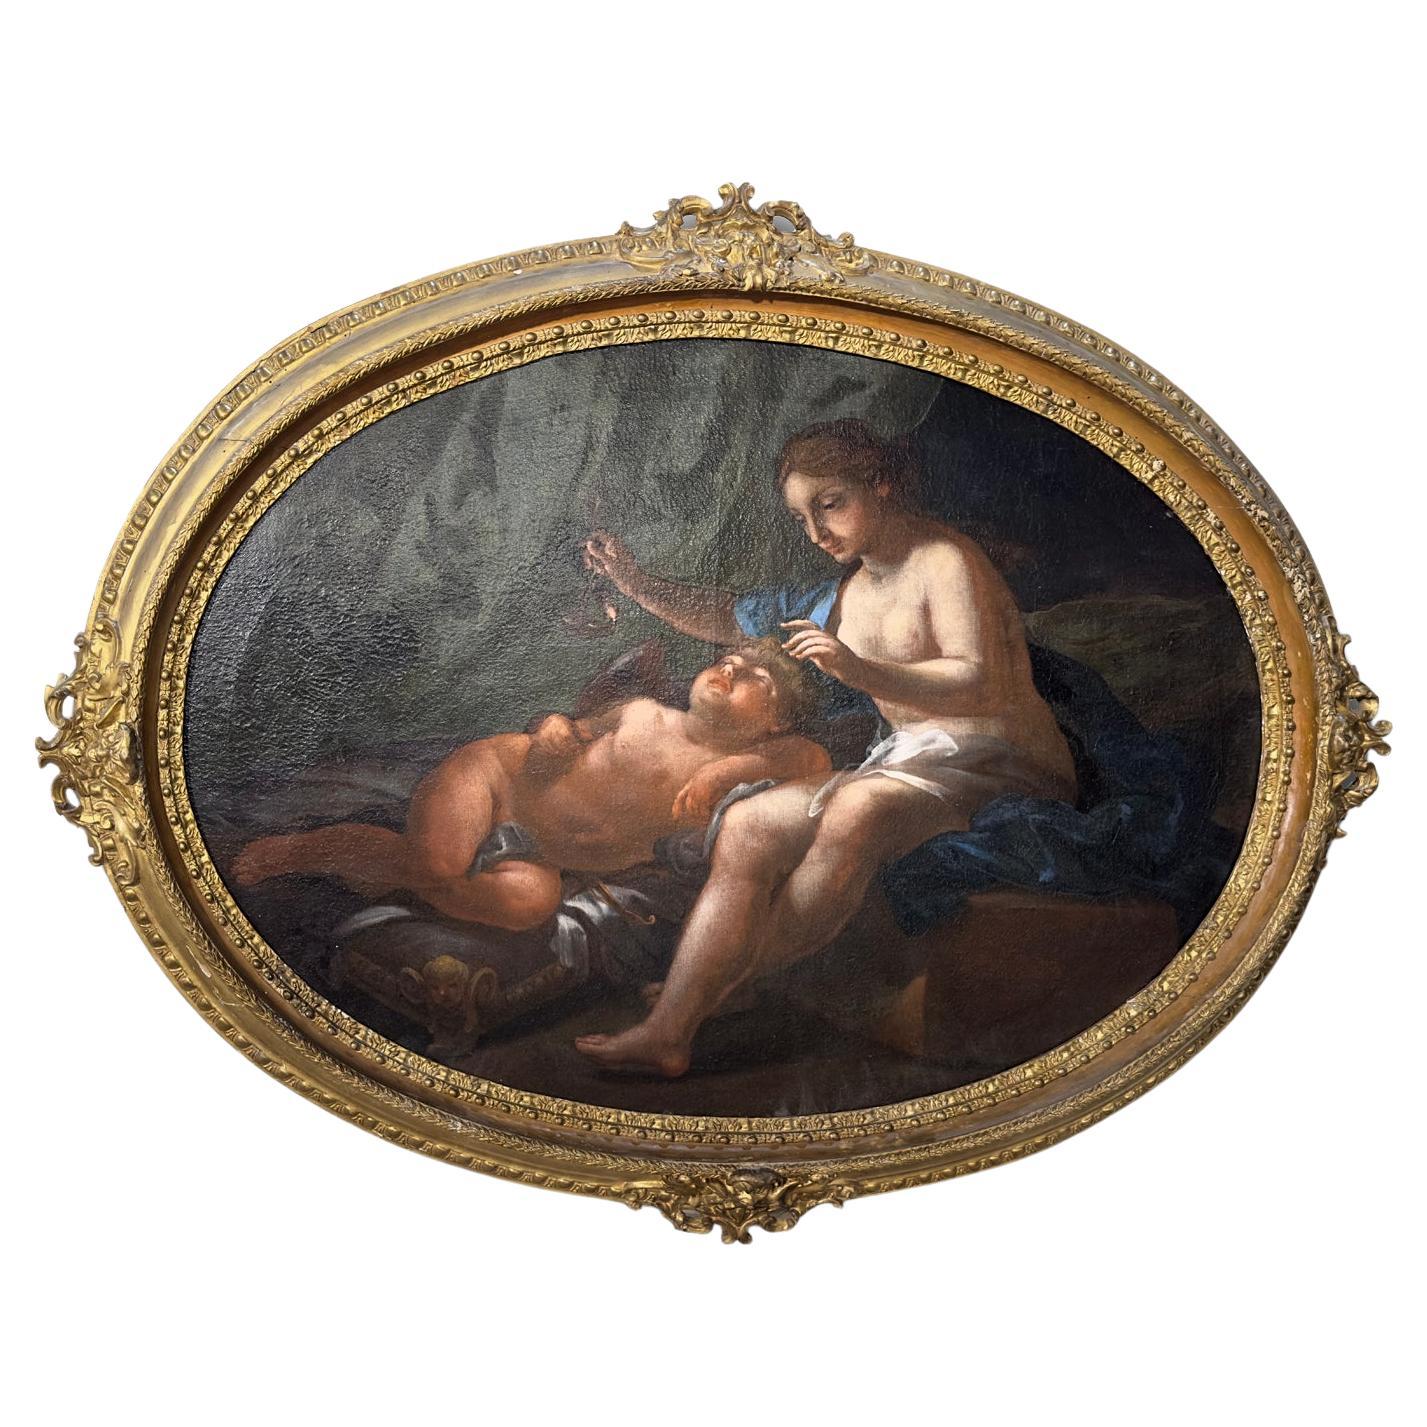 EARLY 18th CENTURY OVAL PAINTING VENUS AND CUPID 